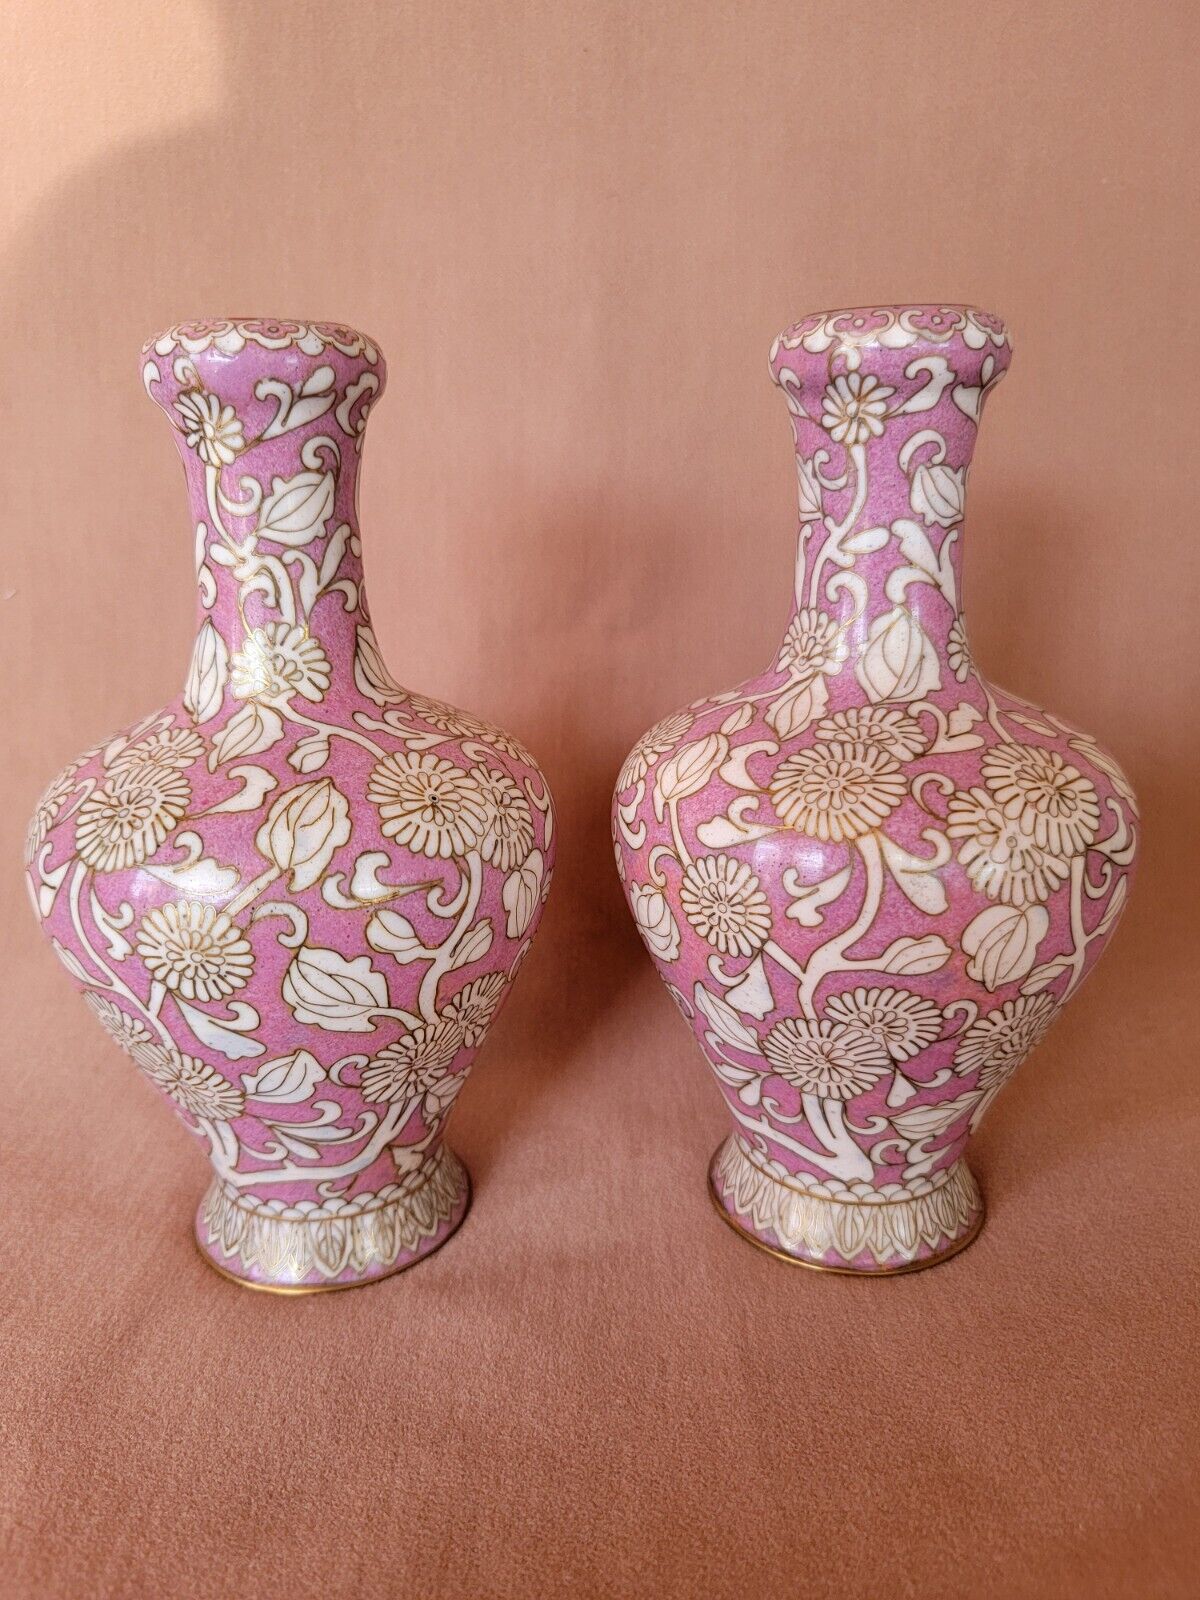 Matching Pair of Cloisonne Vases White on Lavender Rare Color Excellent 7 1/4”